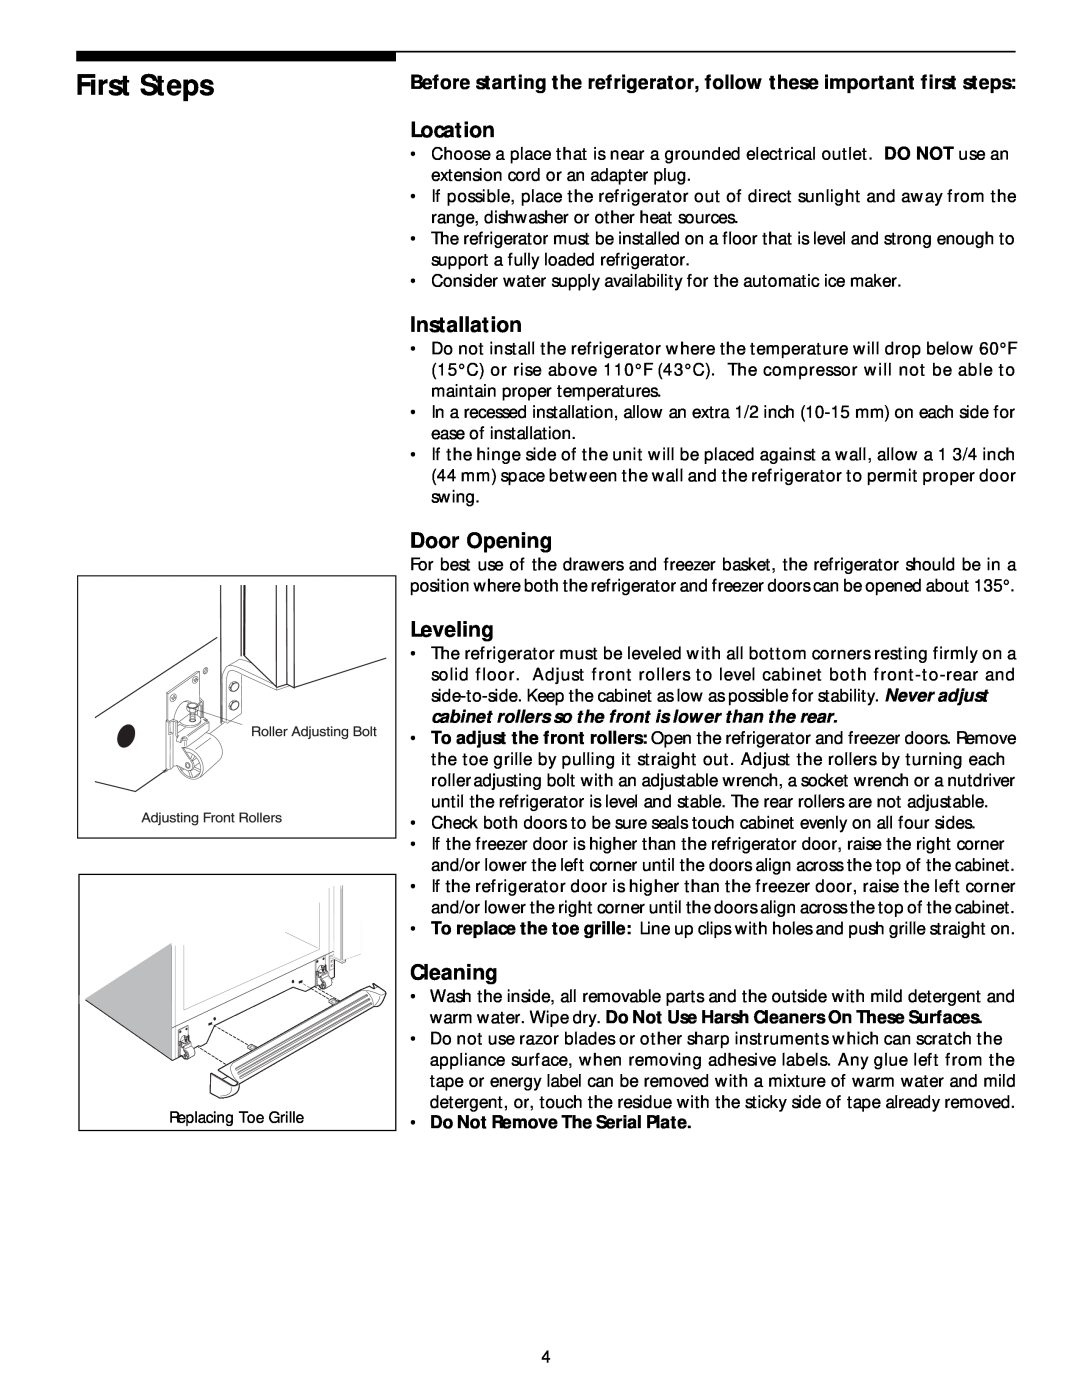 White-Westinghouse 218954301 manual First Steps, Location, Installation, Door Opening, Leveling, Cleaning 